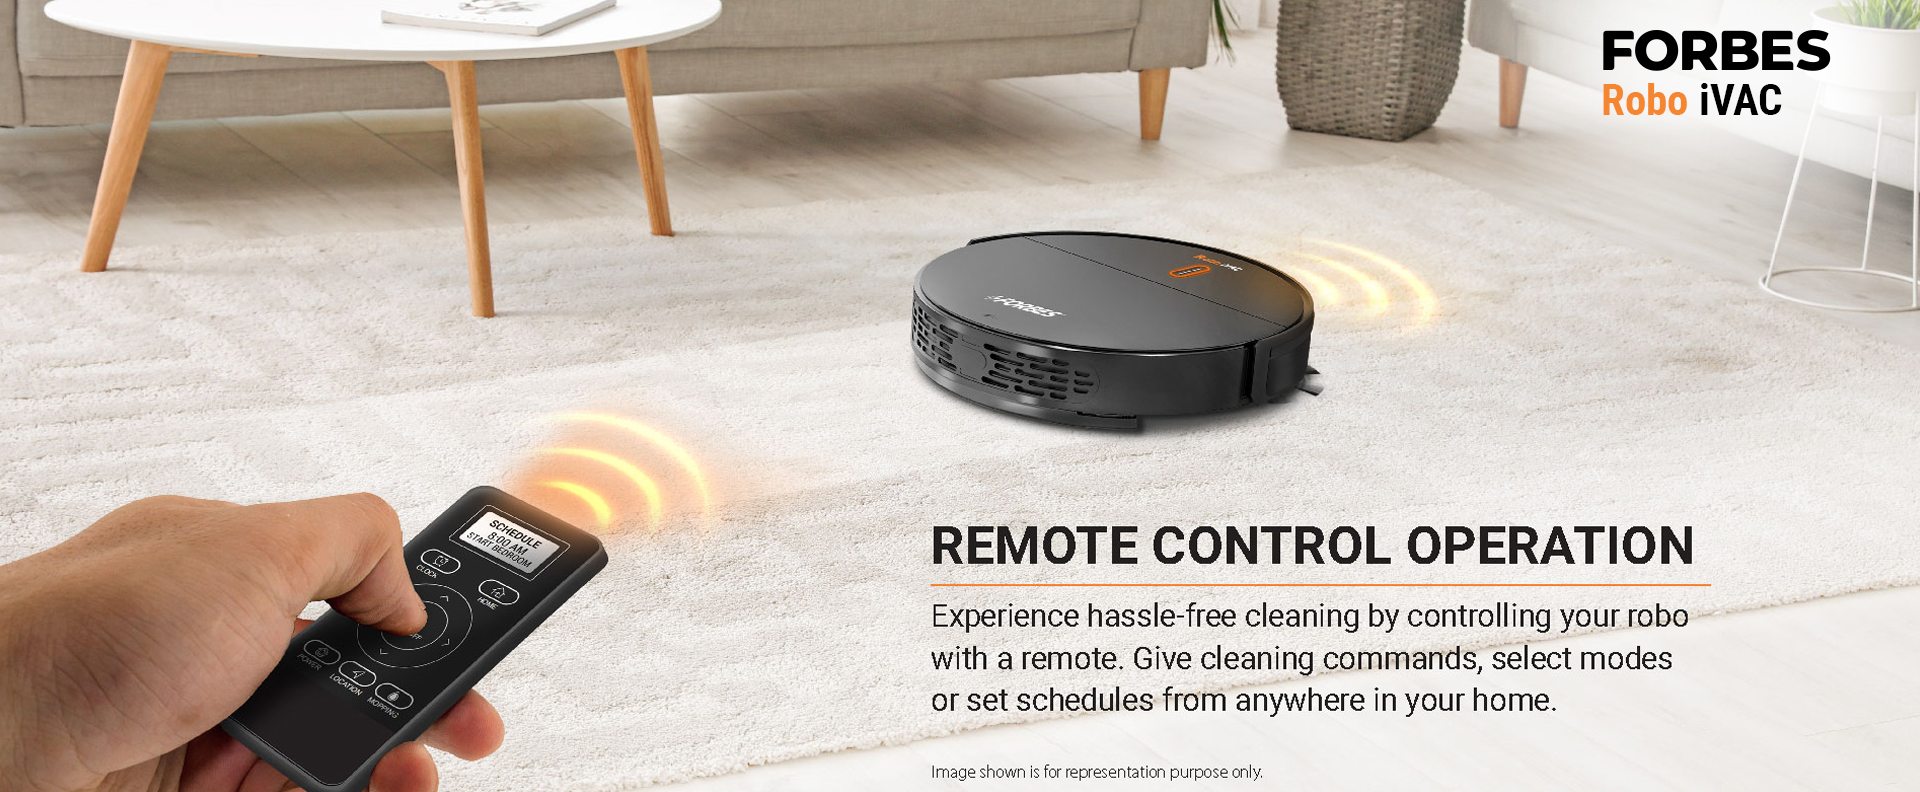 Experience hassle-free cleaning by controlling your robo with a remote. Give cleaning commands, select modes or set schedules from anywhere in your home. Image shown is for representation purpose only.